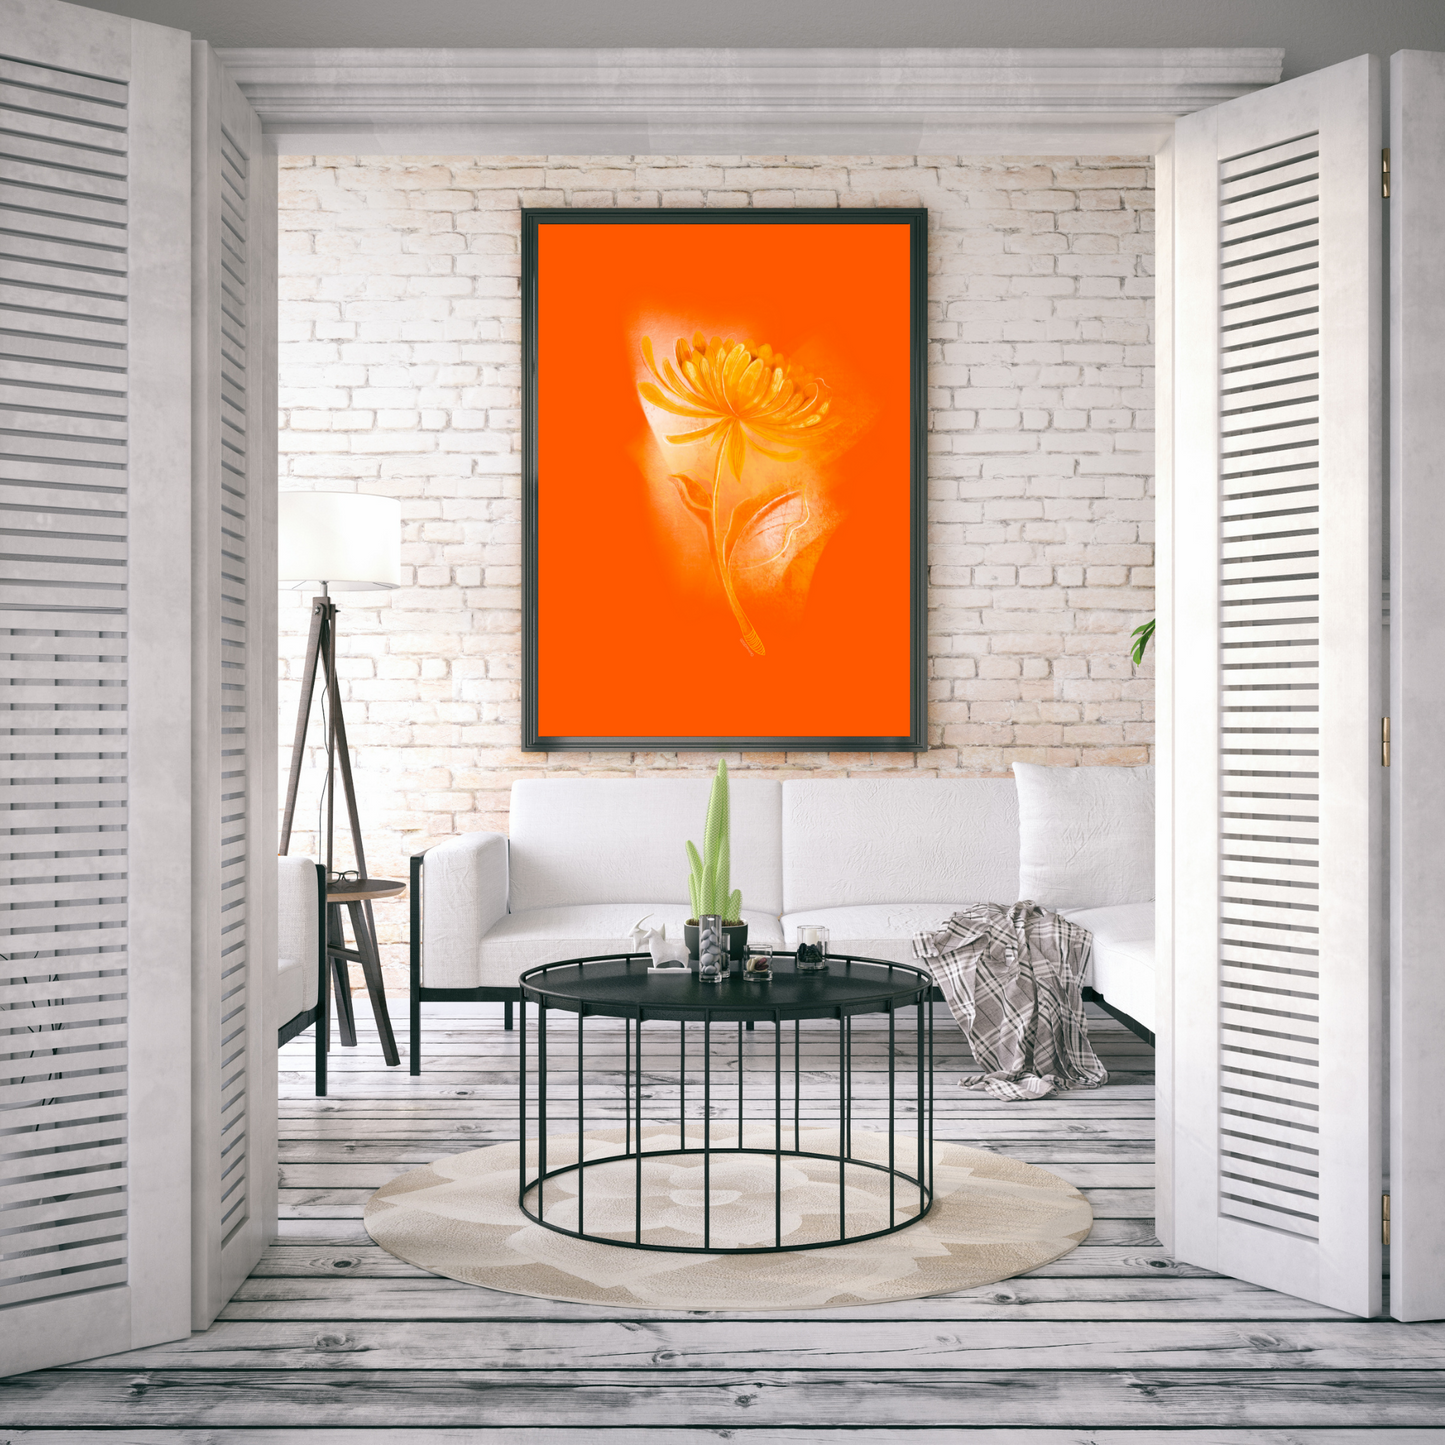 An example of the Chrysanthemum painting by ArisaTeam in a living room